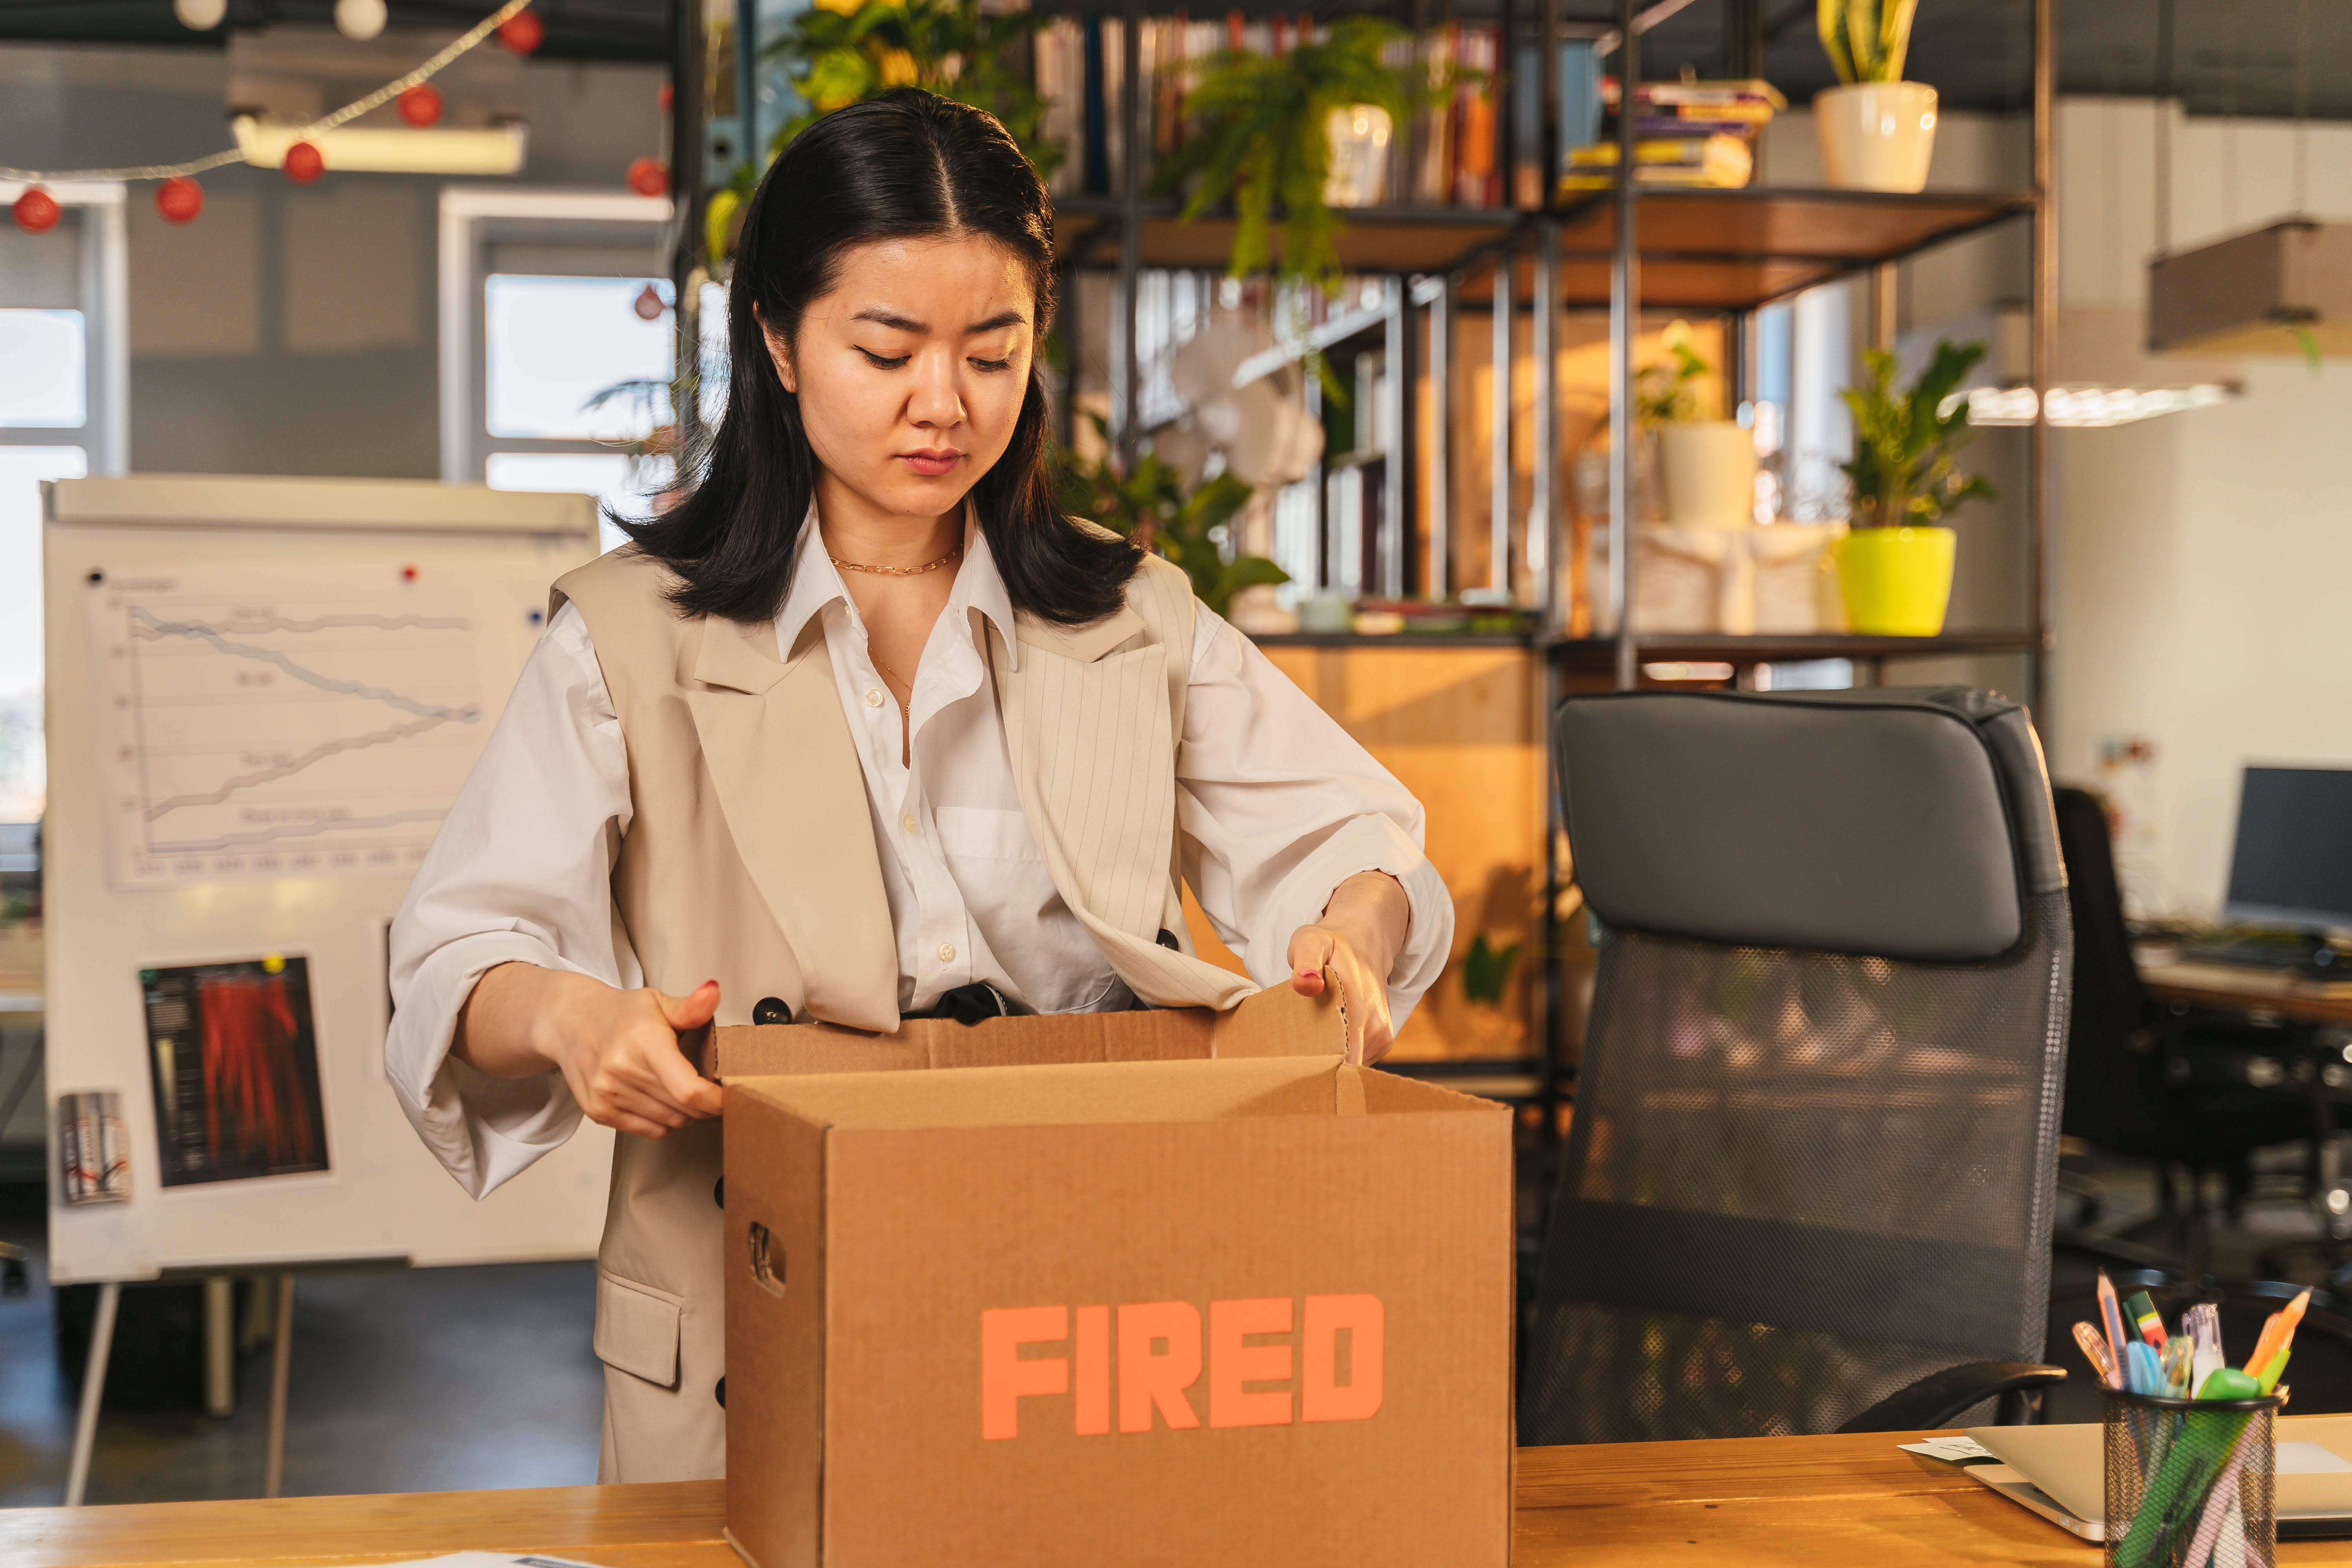 A woman packing her belongings after getting fired. | Source: Pexels